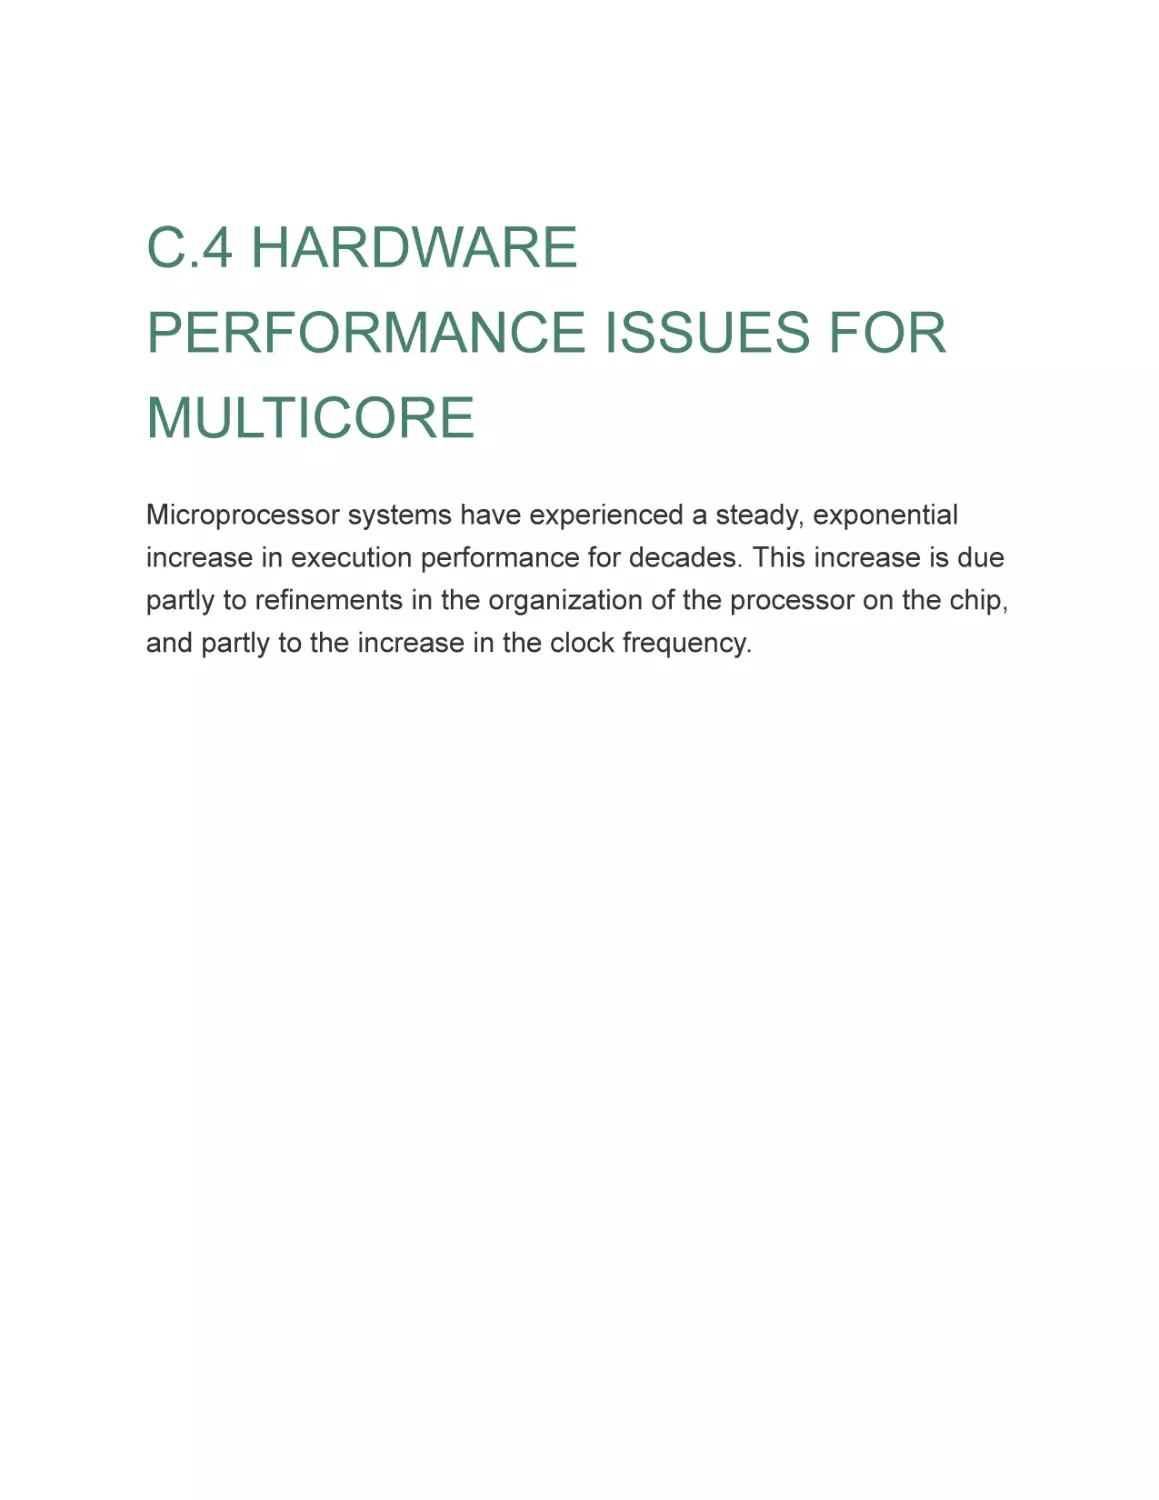 C.4 HARDWARE PERFORMANCE ISSUES FOR MULTICORE